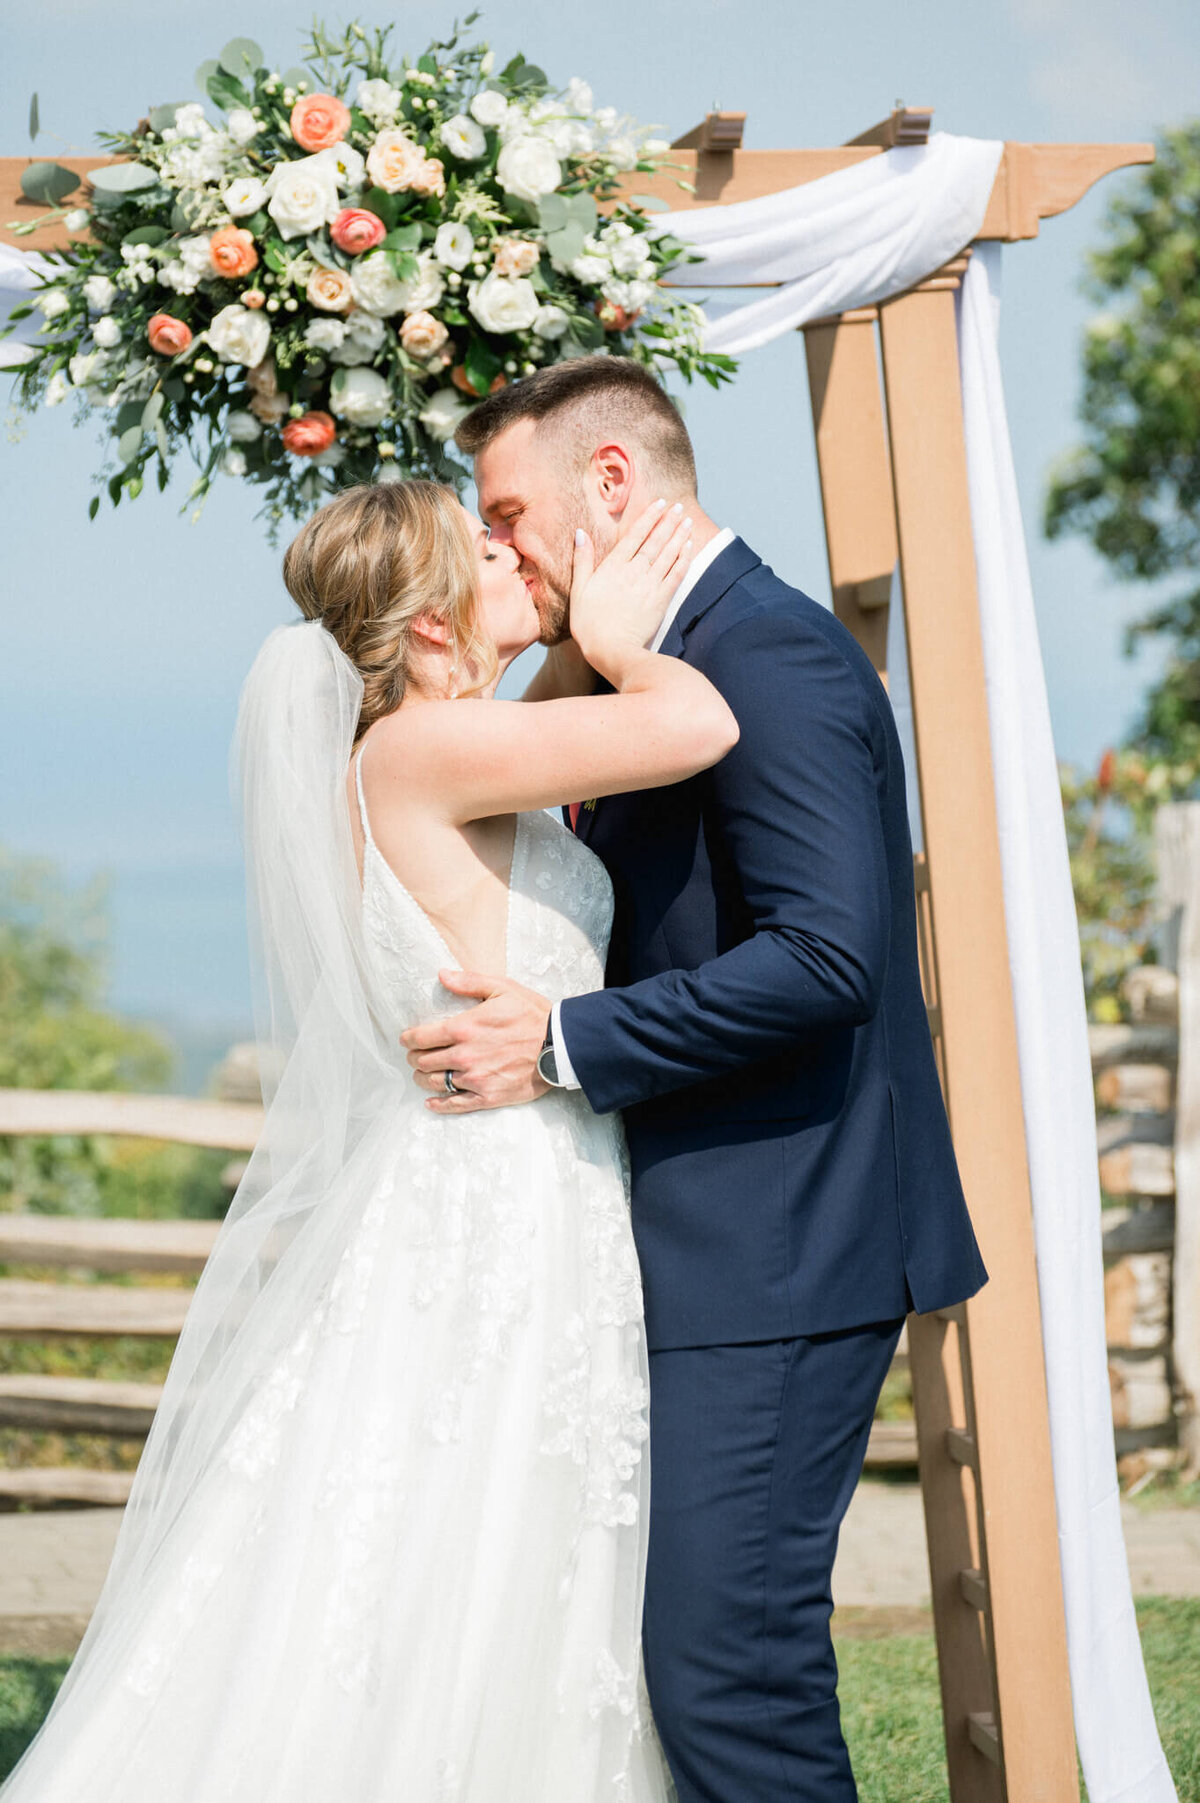 Bride and groom make their first kiss captured by Niagara wedding photographer